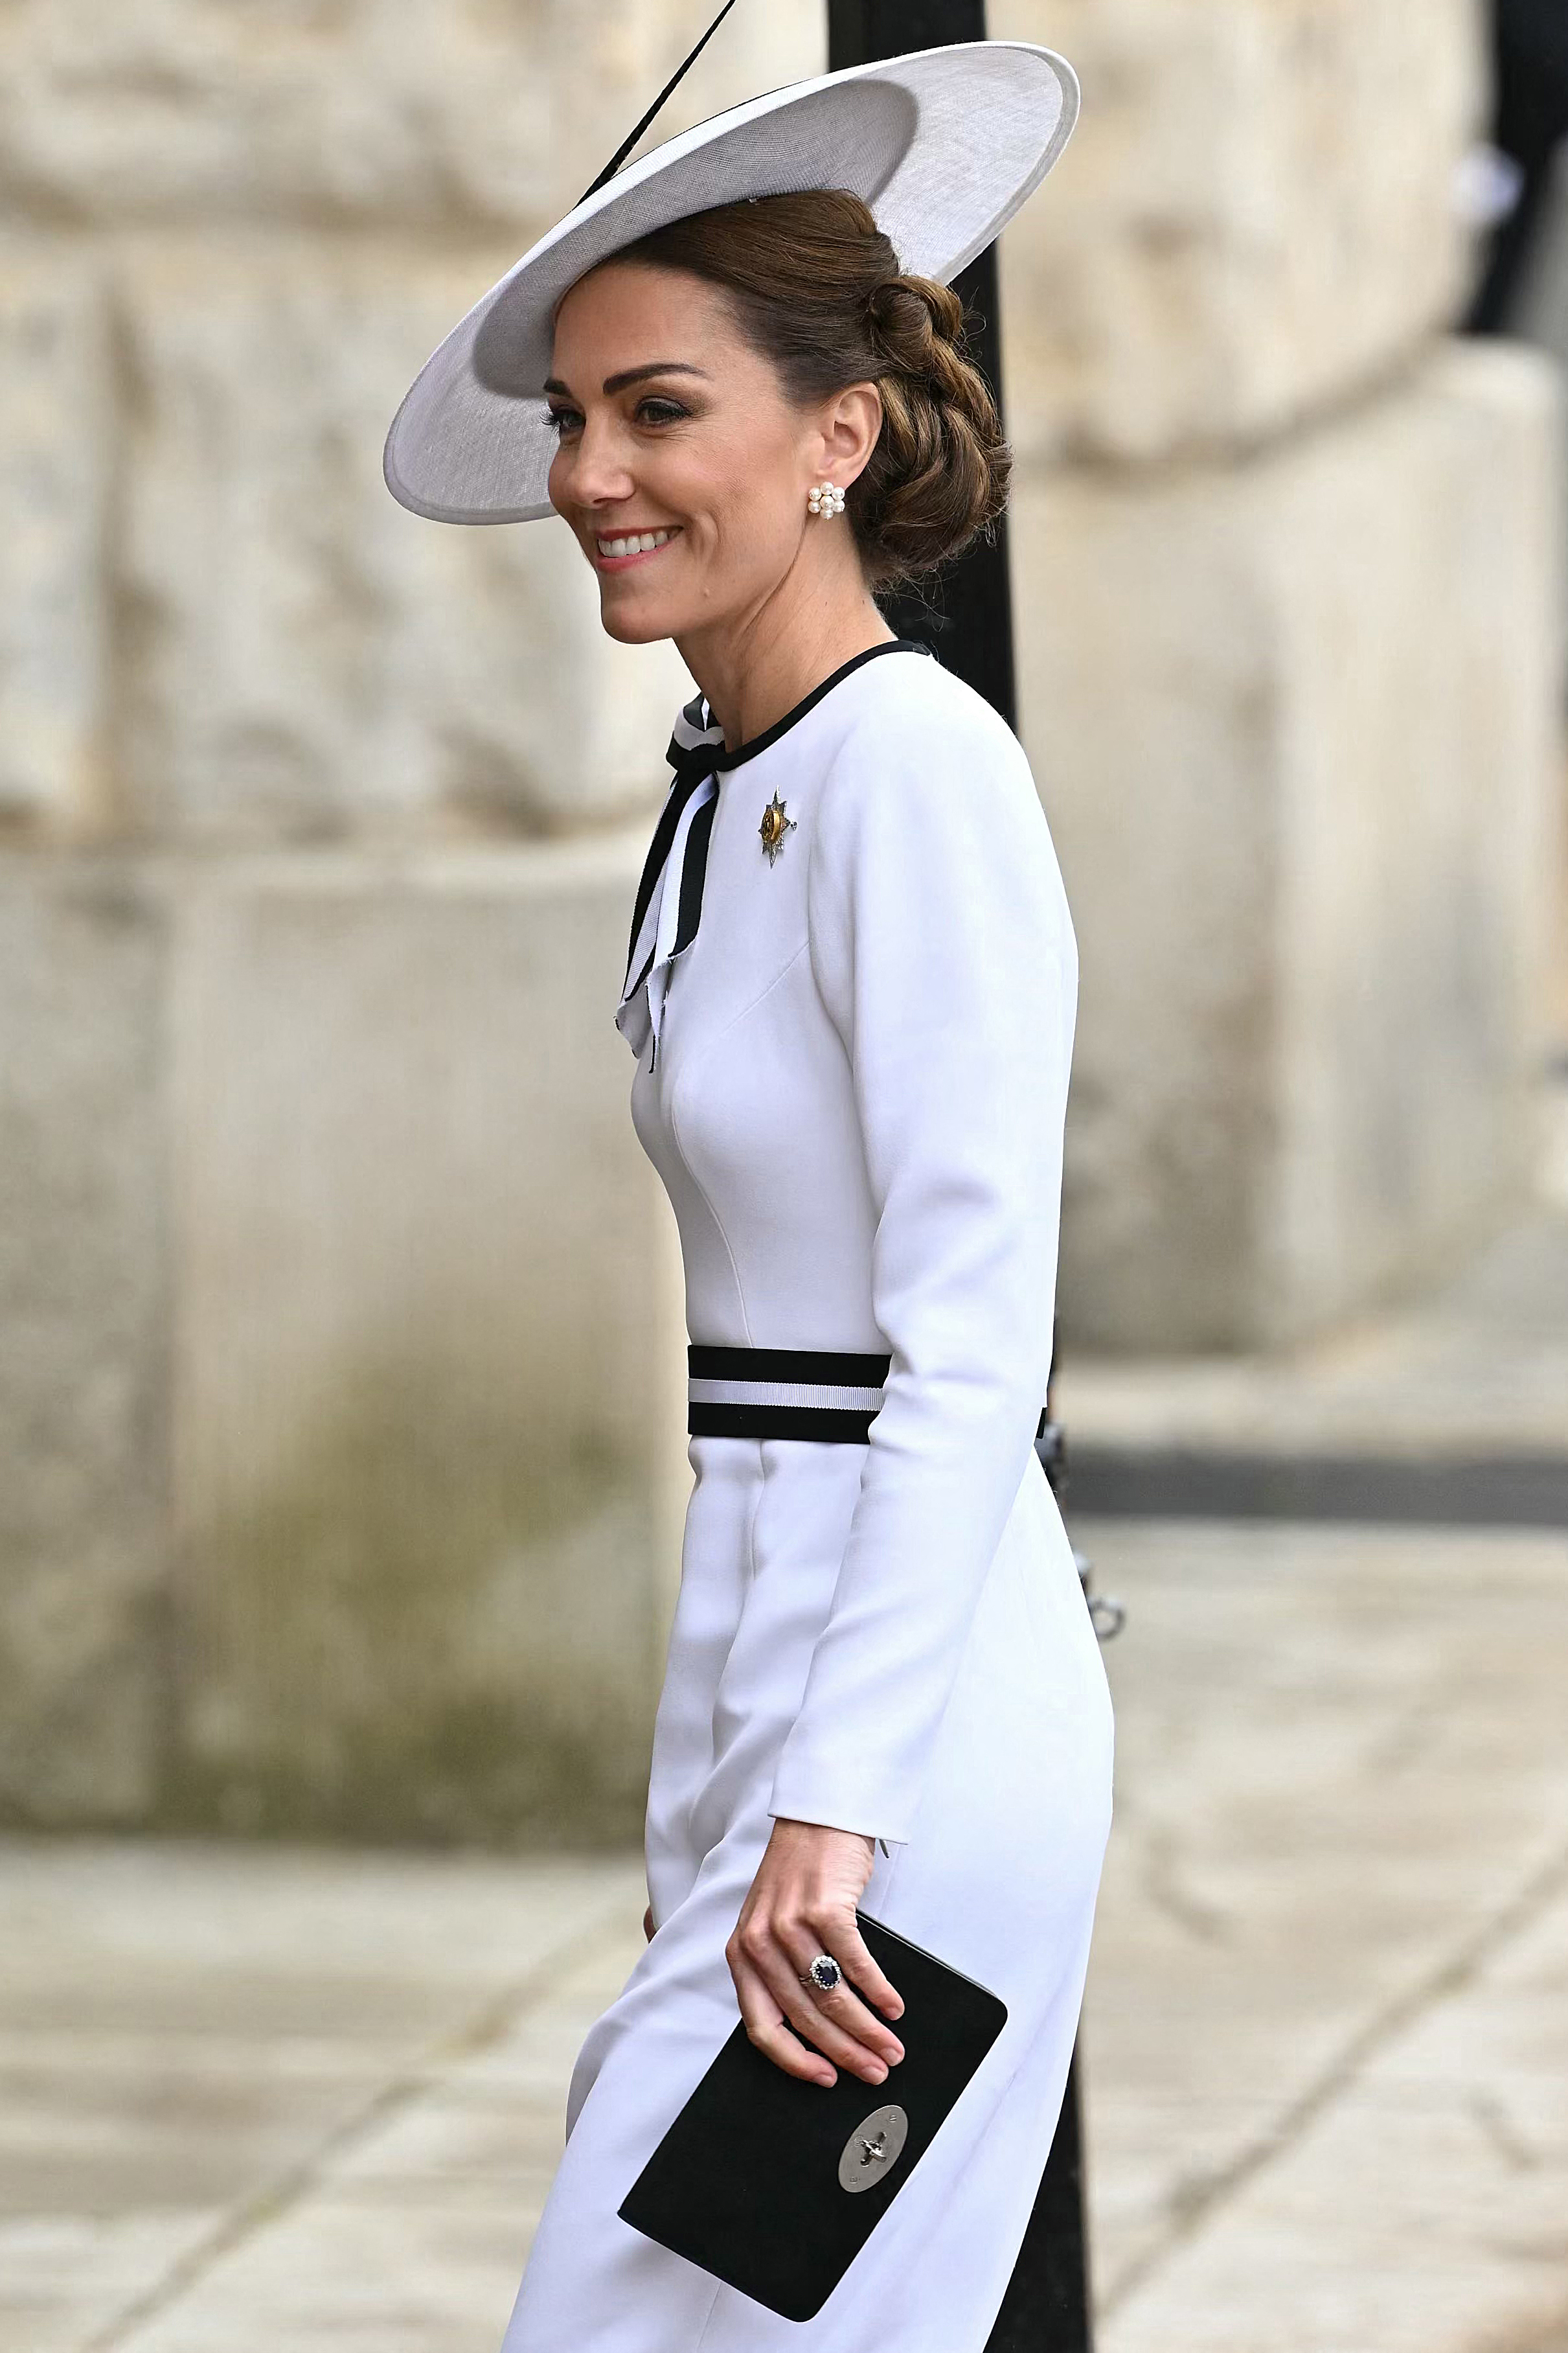 'That's Not Her': Princess Catherine's Hair Shocks Royal Fans amid ...